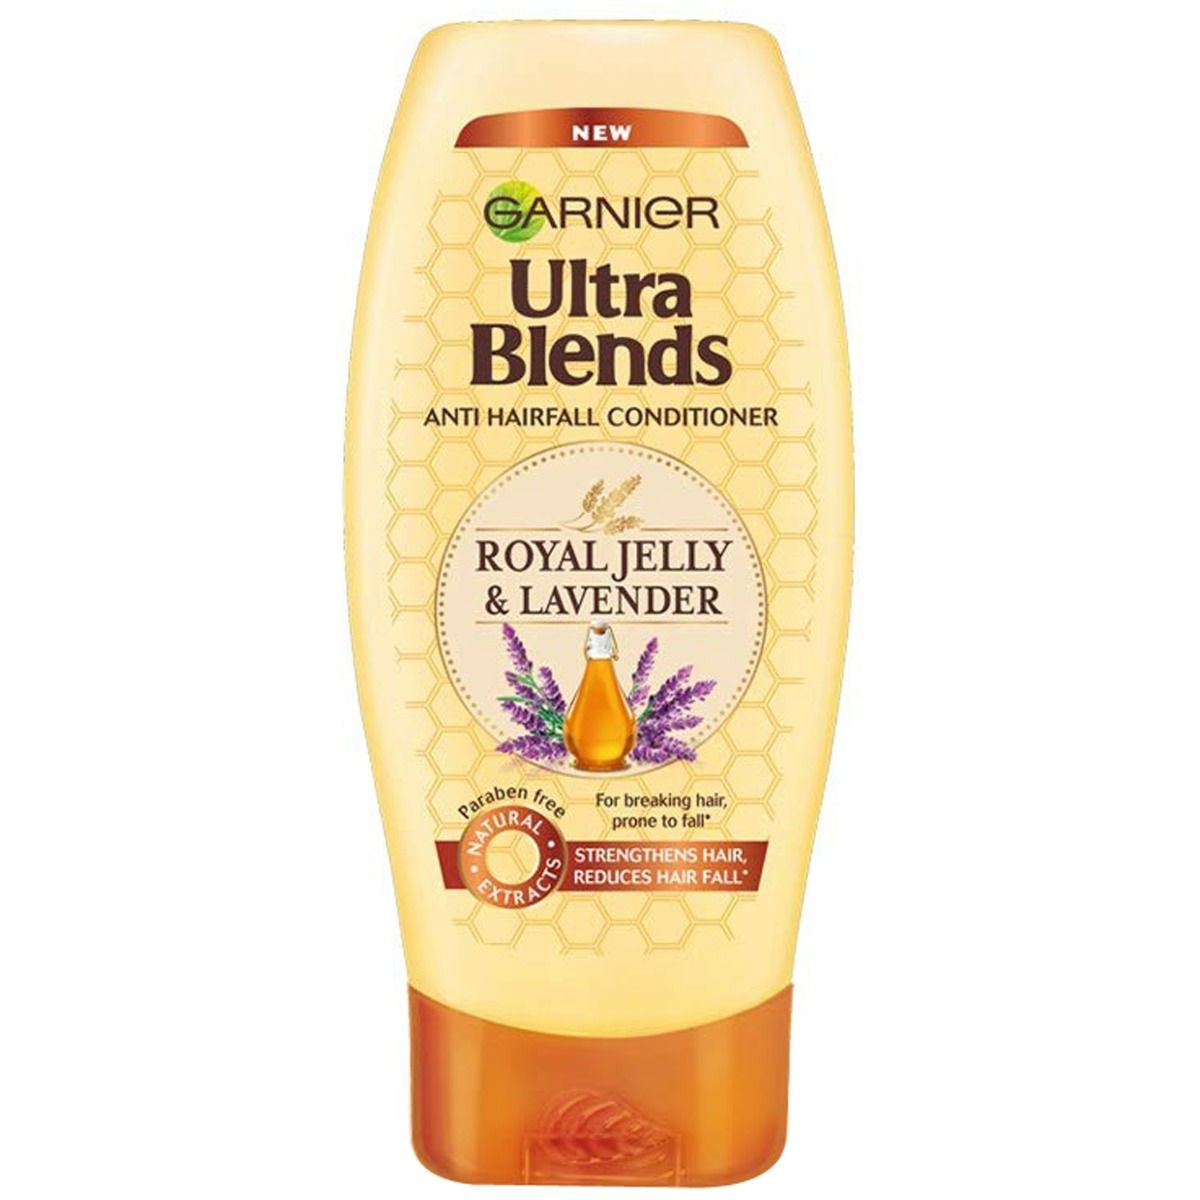 Buy Garnier Ultra Blends Royal Jelly and Lavender Anti Hairfall Conditioner, 175 ml Online